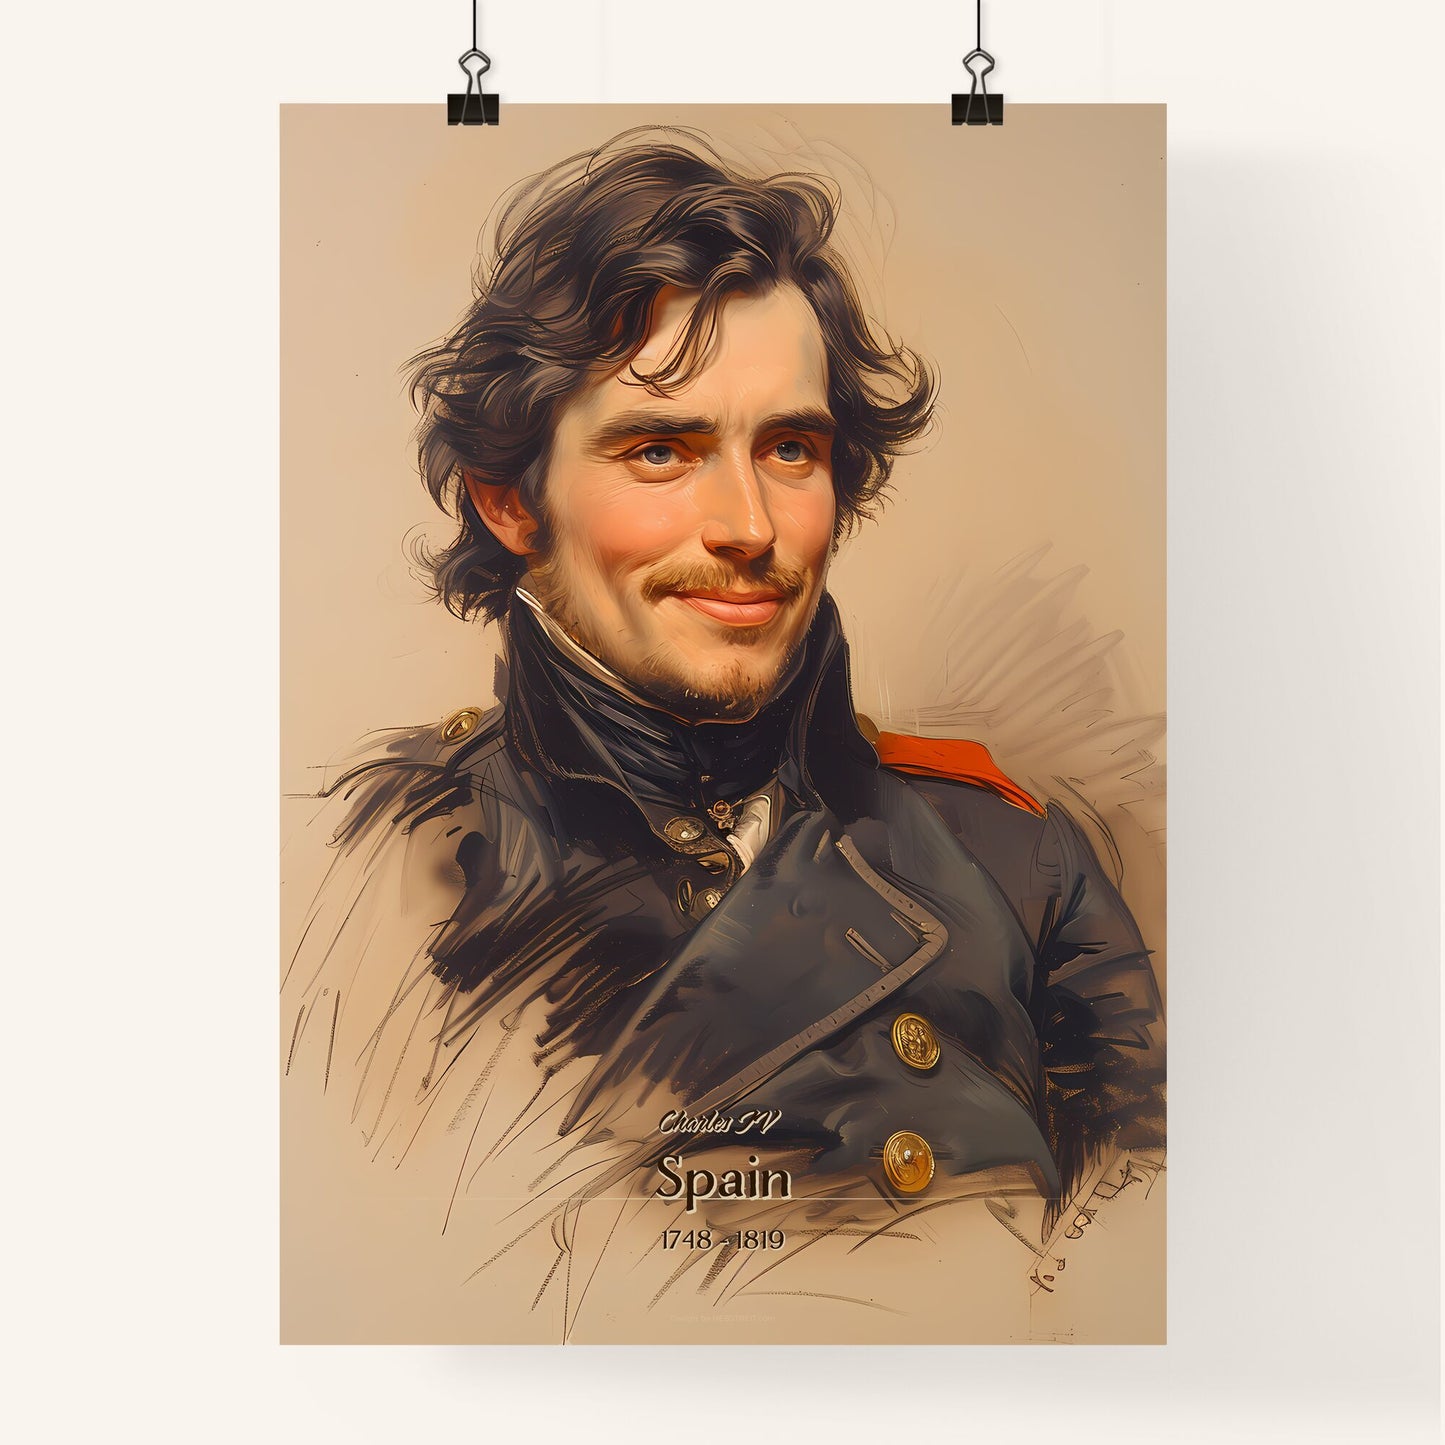 Charles IV, Spain, 1748 - 1819, A Poster of a man in a military uniform Default Title